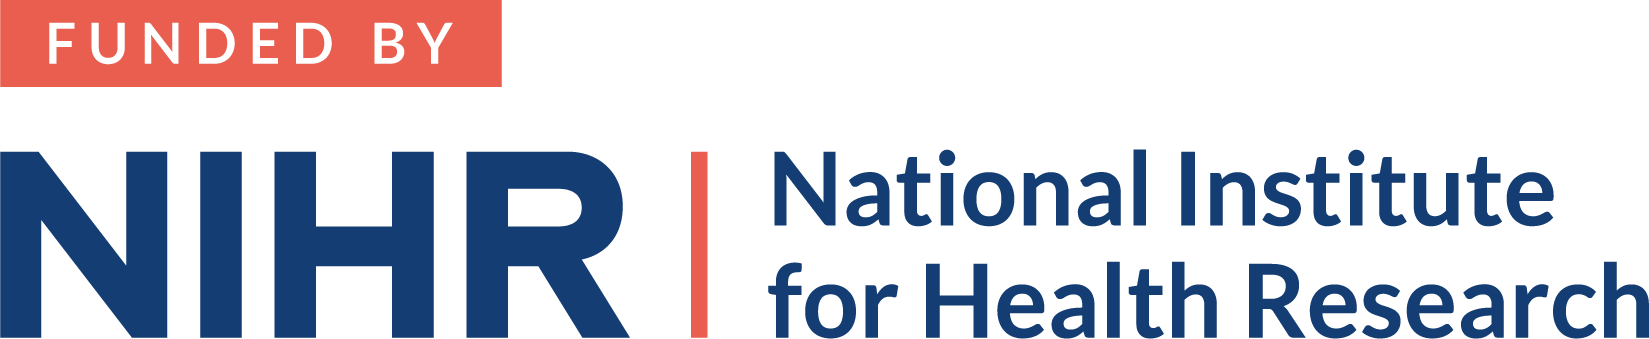 Funded by NIHR (The National Institute for Health Research)